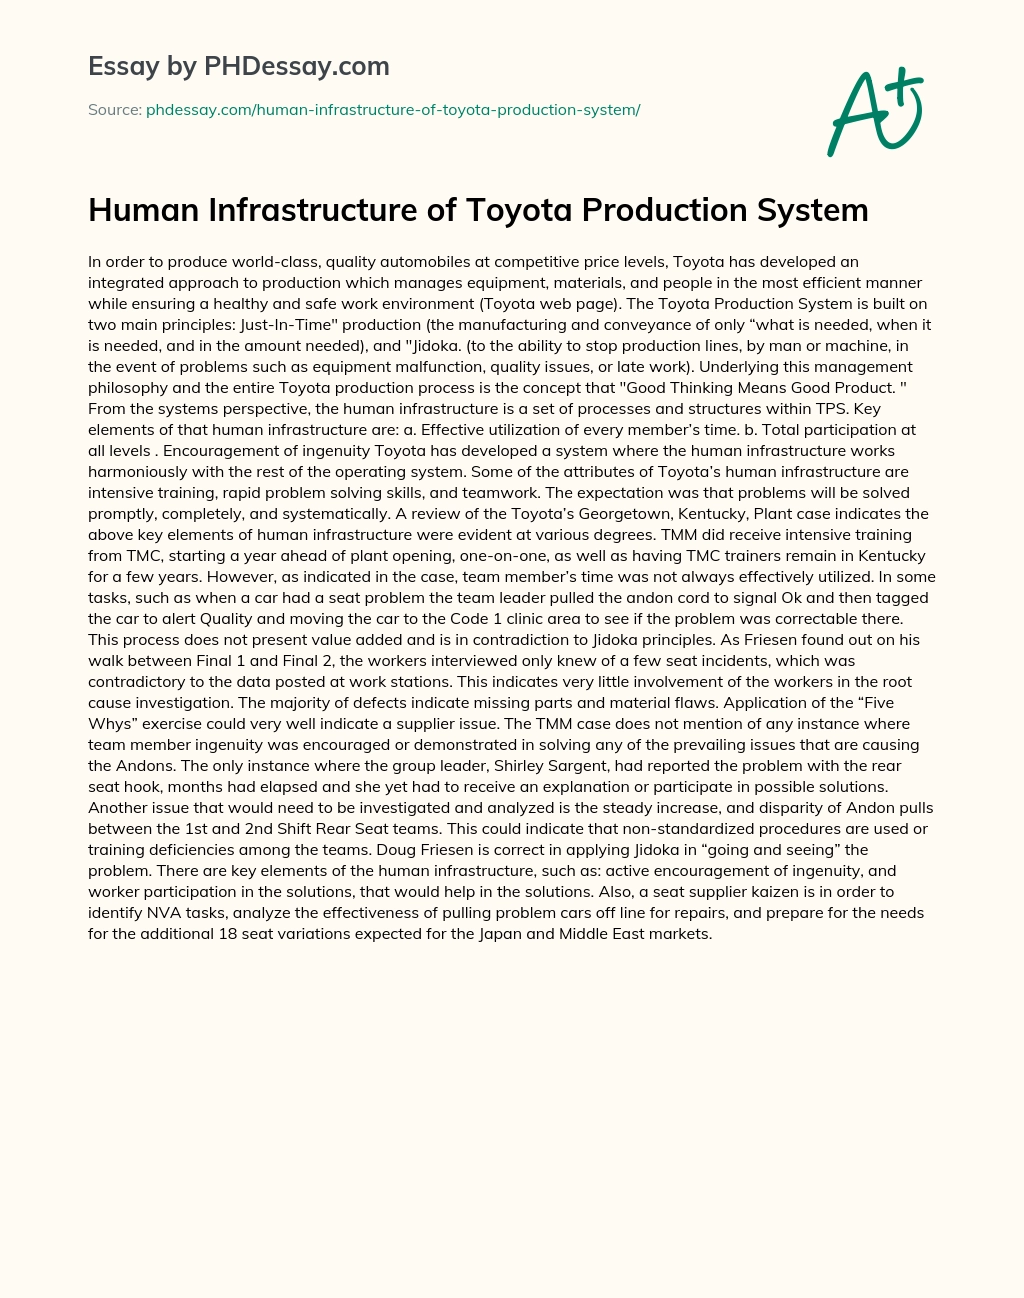 Human Infrastructure of Toyota Production System essay